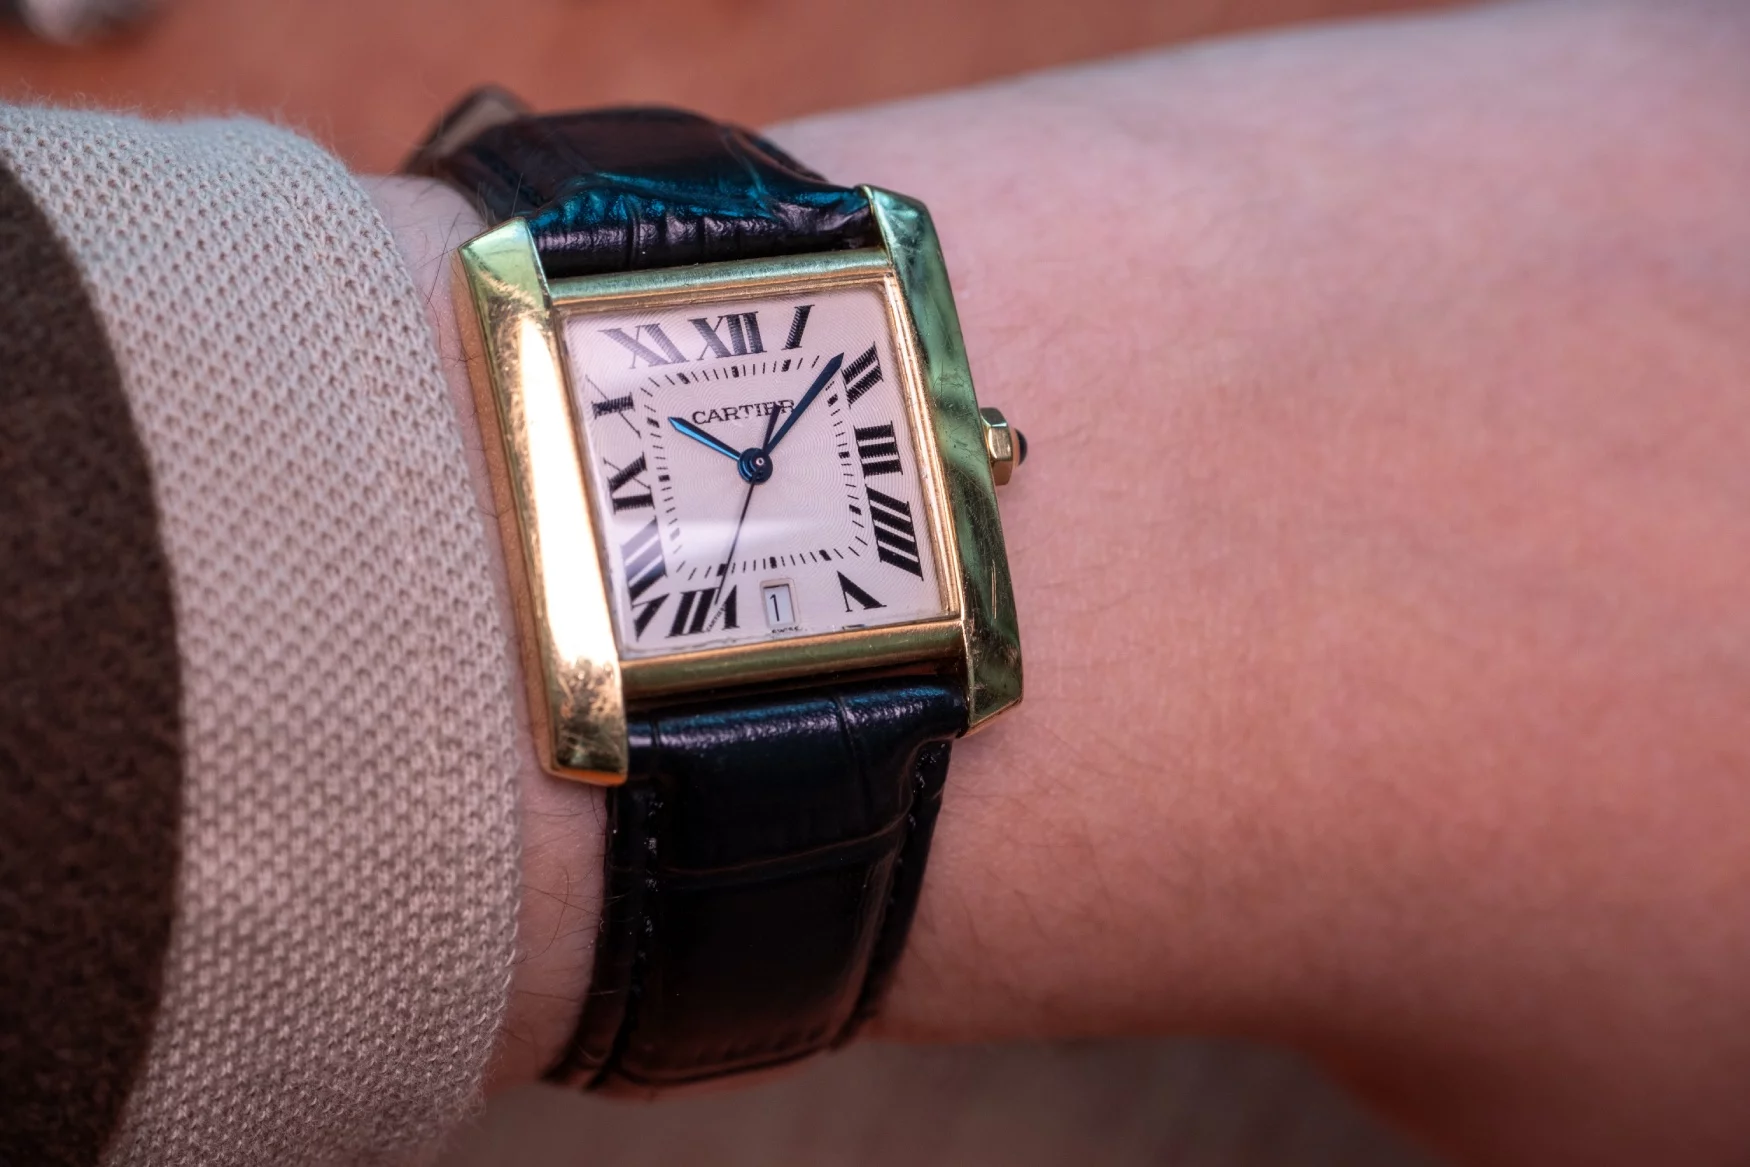 Cartier Tank Francaise Small - Pink Gold Watches